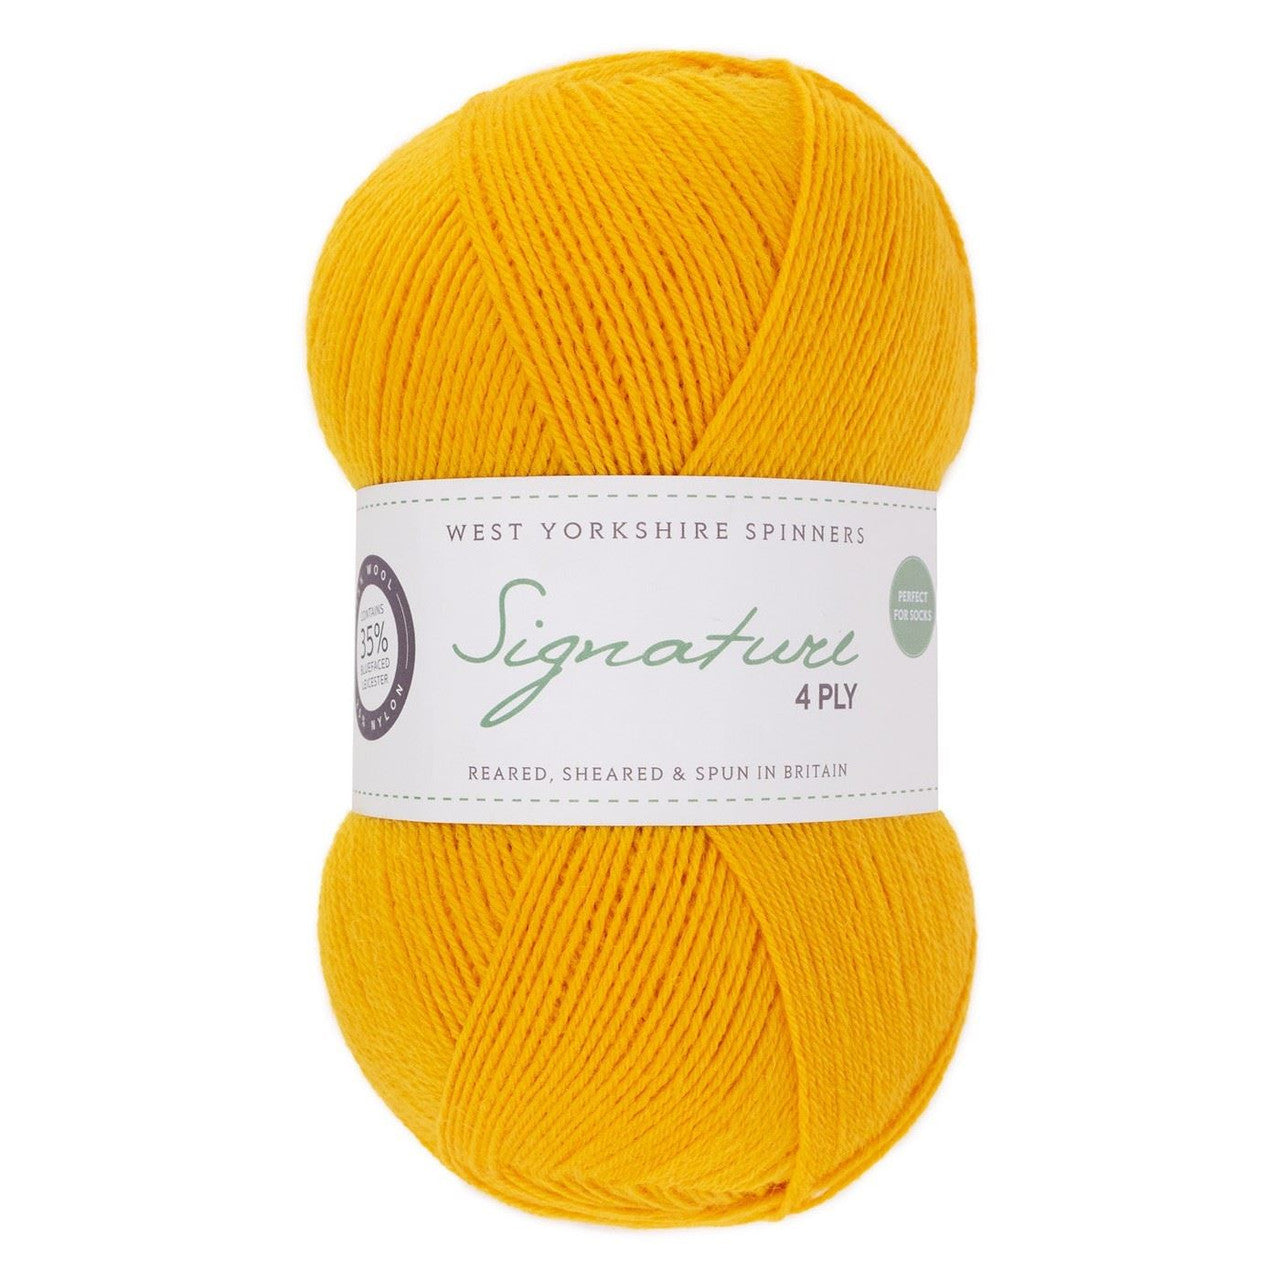 West Yorkshire Spinners Signature 4 Ply Yarn sunflower